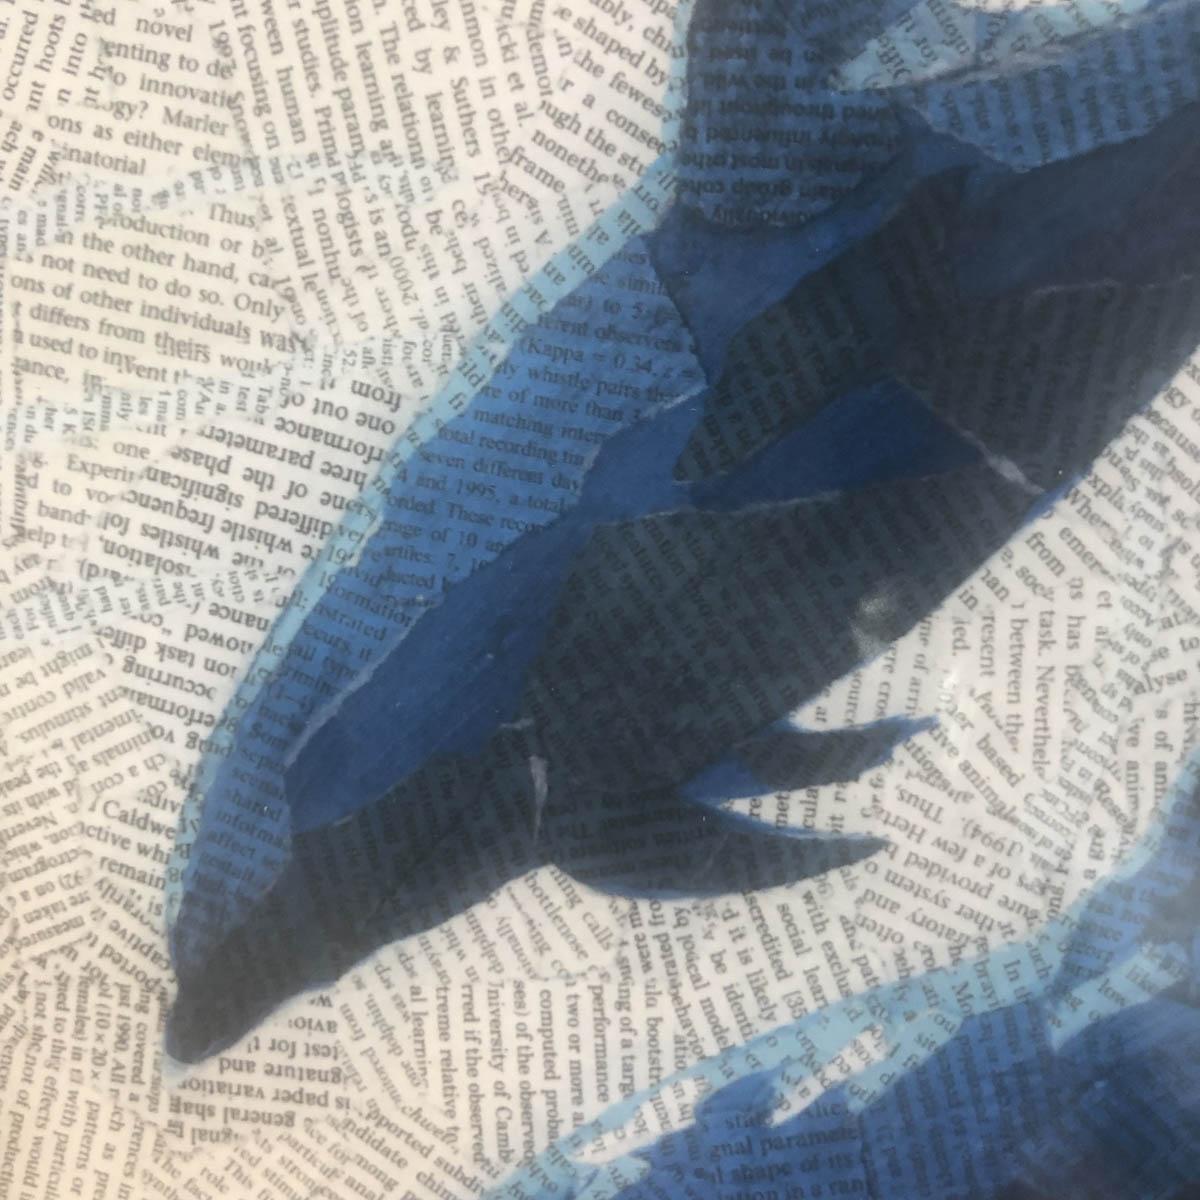 Paul Bartlett. Whistlers.

A family group of bottlenose dolphins swim effortlessly, sun glinting off their dorsal surfaces. The painting is constructed using pieces of ripped paper from pertinent scientific papers on dolphins so the text relates to